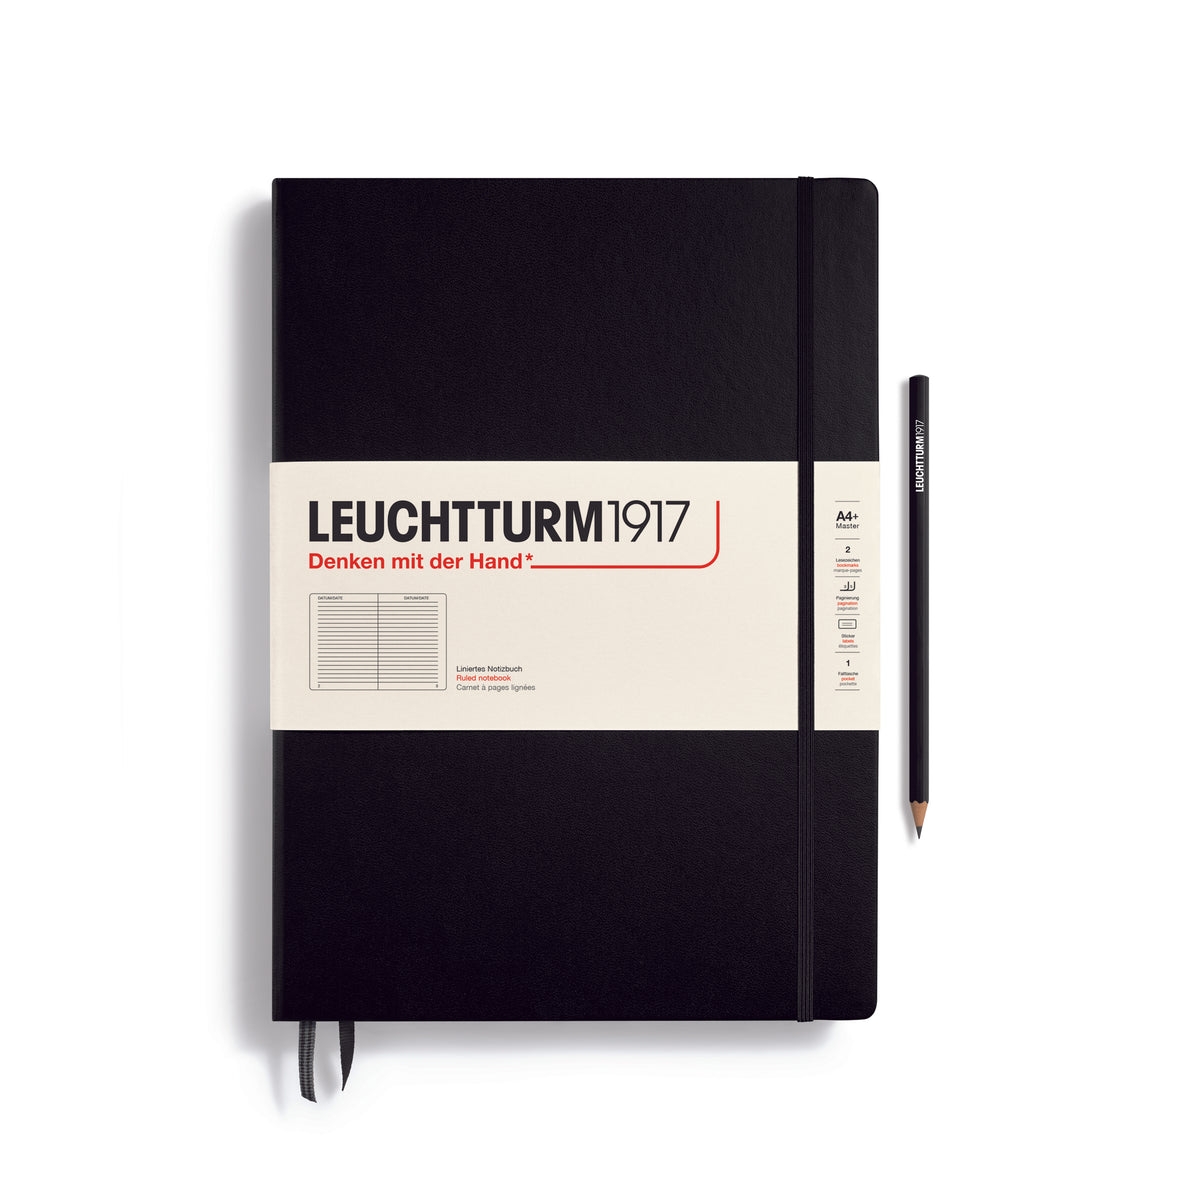 A large black notebook with a white paper band around it with the logo of the brand Leuchtturm1917. Below this is an image of the page ruling inside - in this case, ruled or lined. It has two page marker ribbons showing at the bottom near the binding and an elastic notebook closure holding it neatly together. A black Leuchtturm pencil is shown at the side of the book.